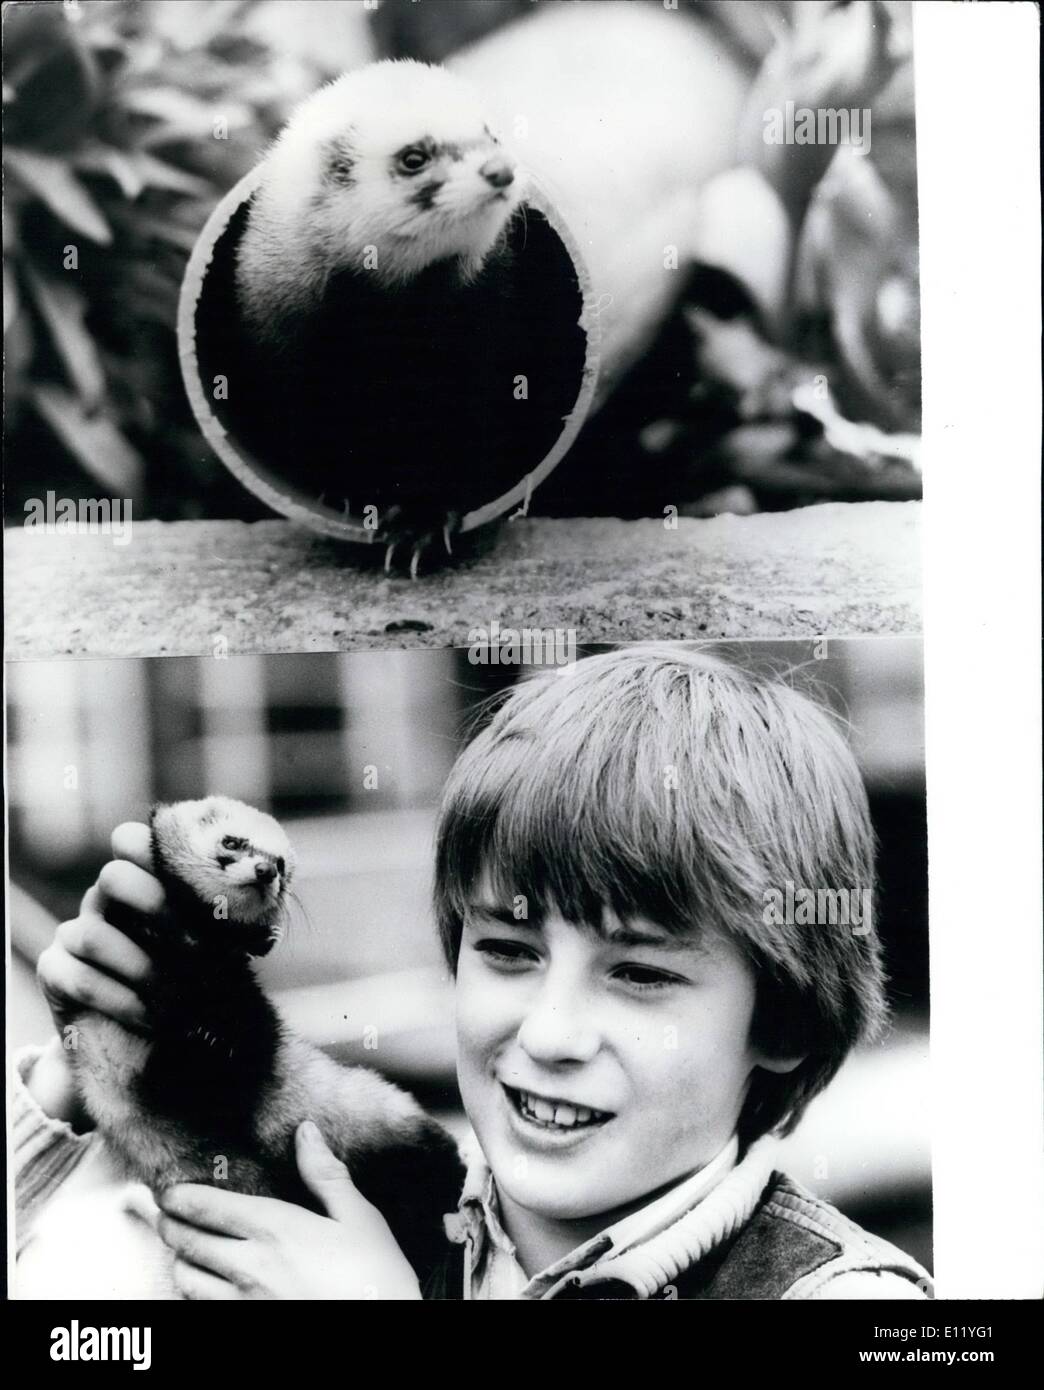 Apr. 04, 1981 - Ferret Pipe Dream: Freda the ferret is lined up for a very special assignment in connection with the Royal Wedding on July 29th. The furry five month old animal's speed and skill are need to pull a TV cable under the streets of London for the TV coverage of the Royal event. The narrow tunnel has a sharp bend and the only way for a cable to be drawn along it is behind a hungry ferret hot on the trail of a piece of meat held at the other end. Freda's proud owner David Overy, 12, from Surrey, showed his clever pet to the press this week Stock Photo